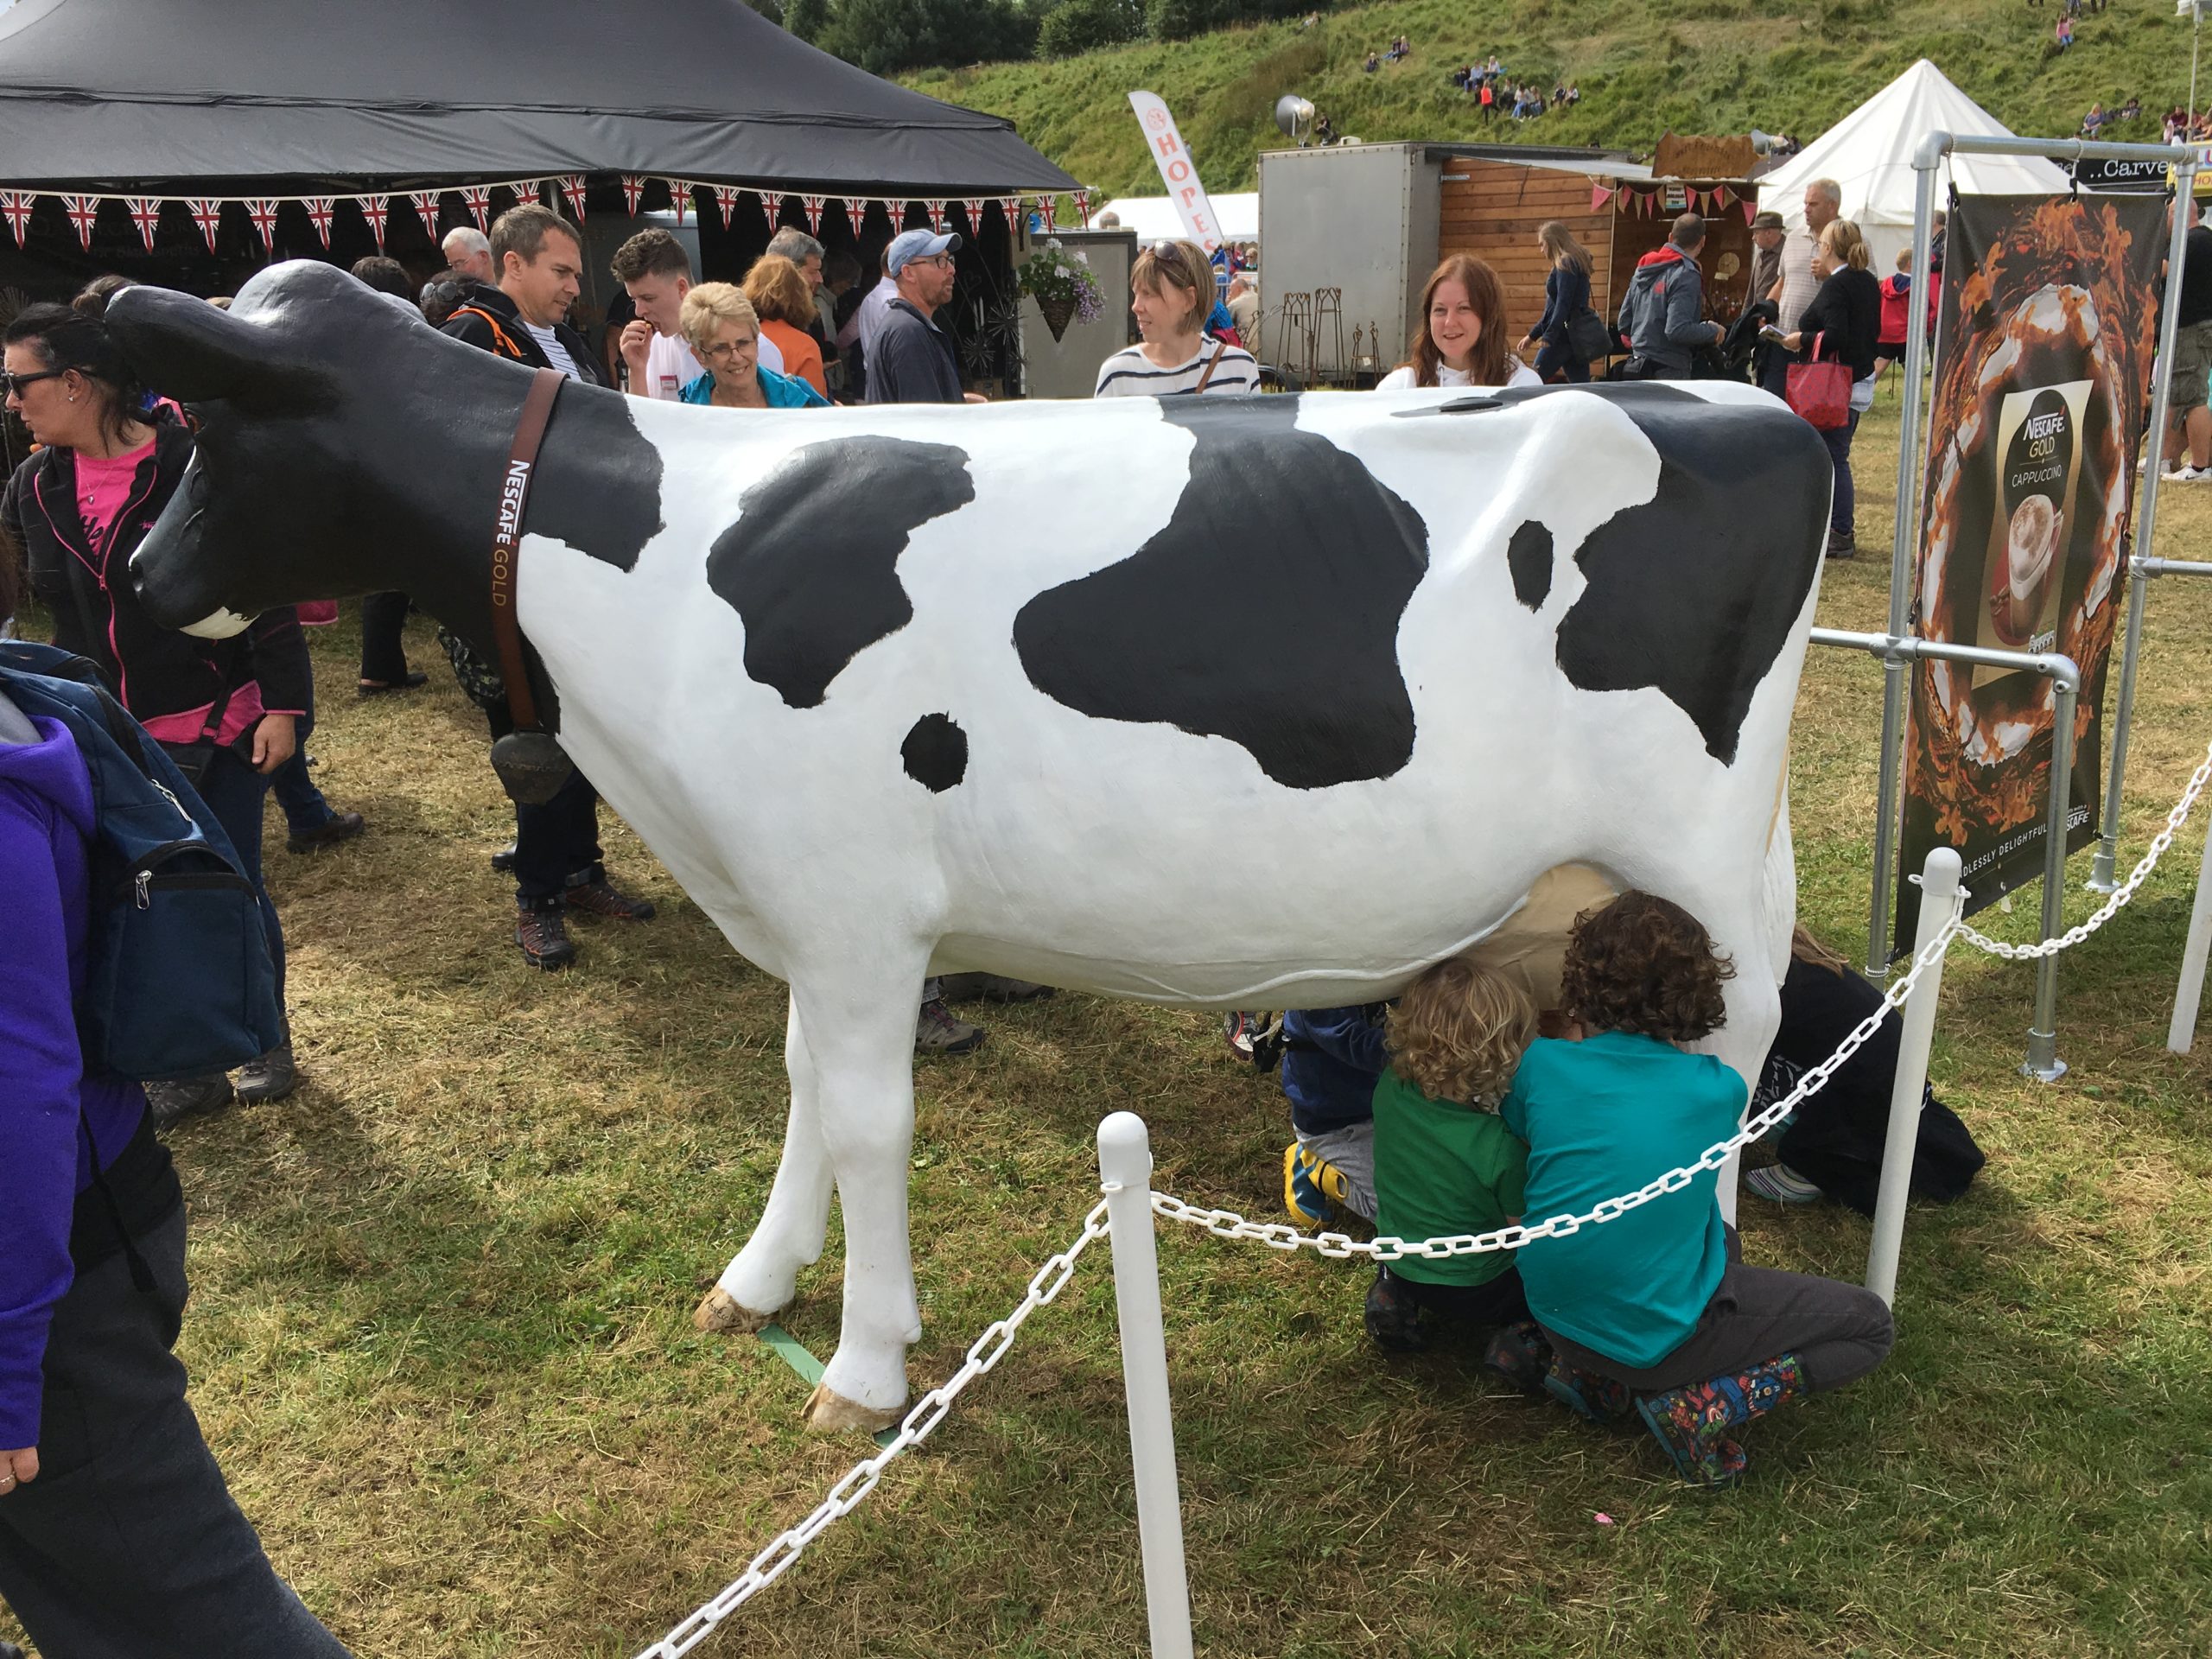 Model Milking Cow at Dalston Show 